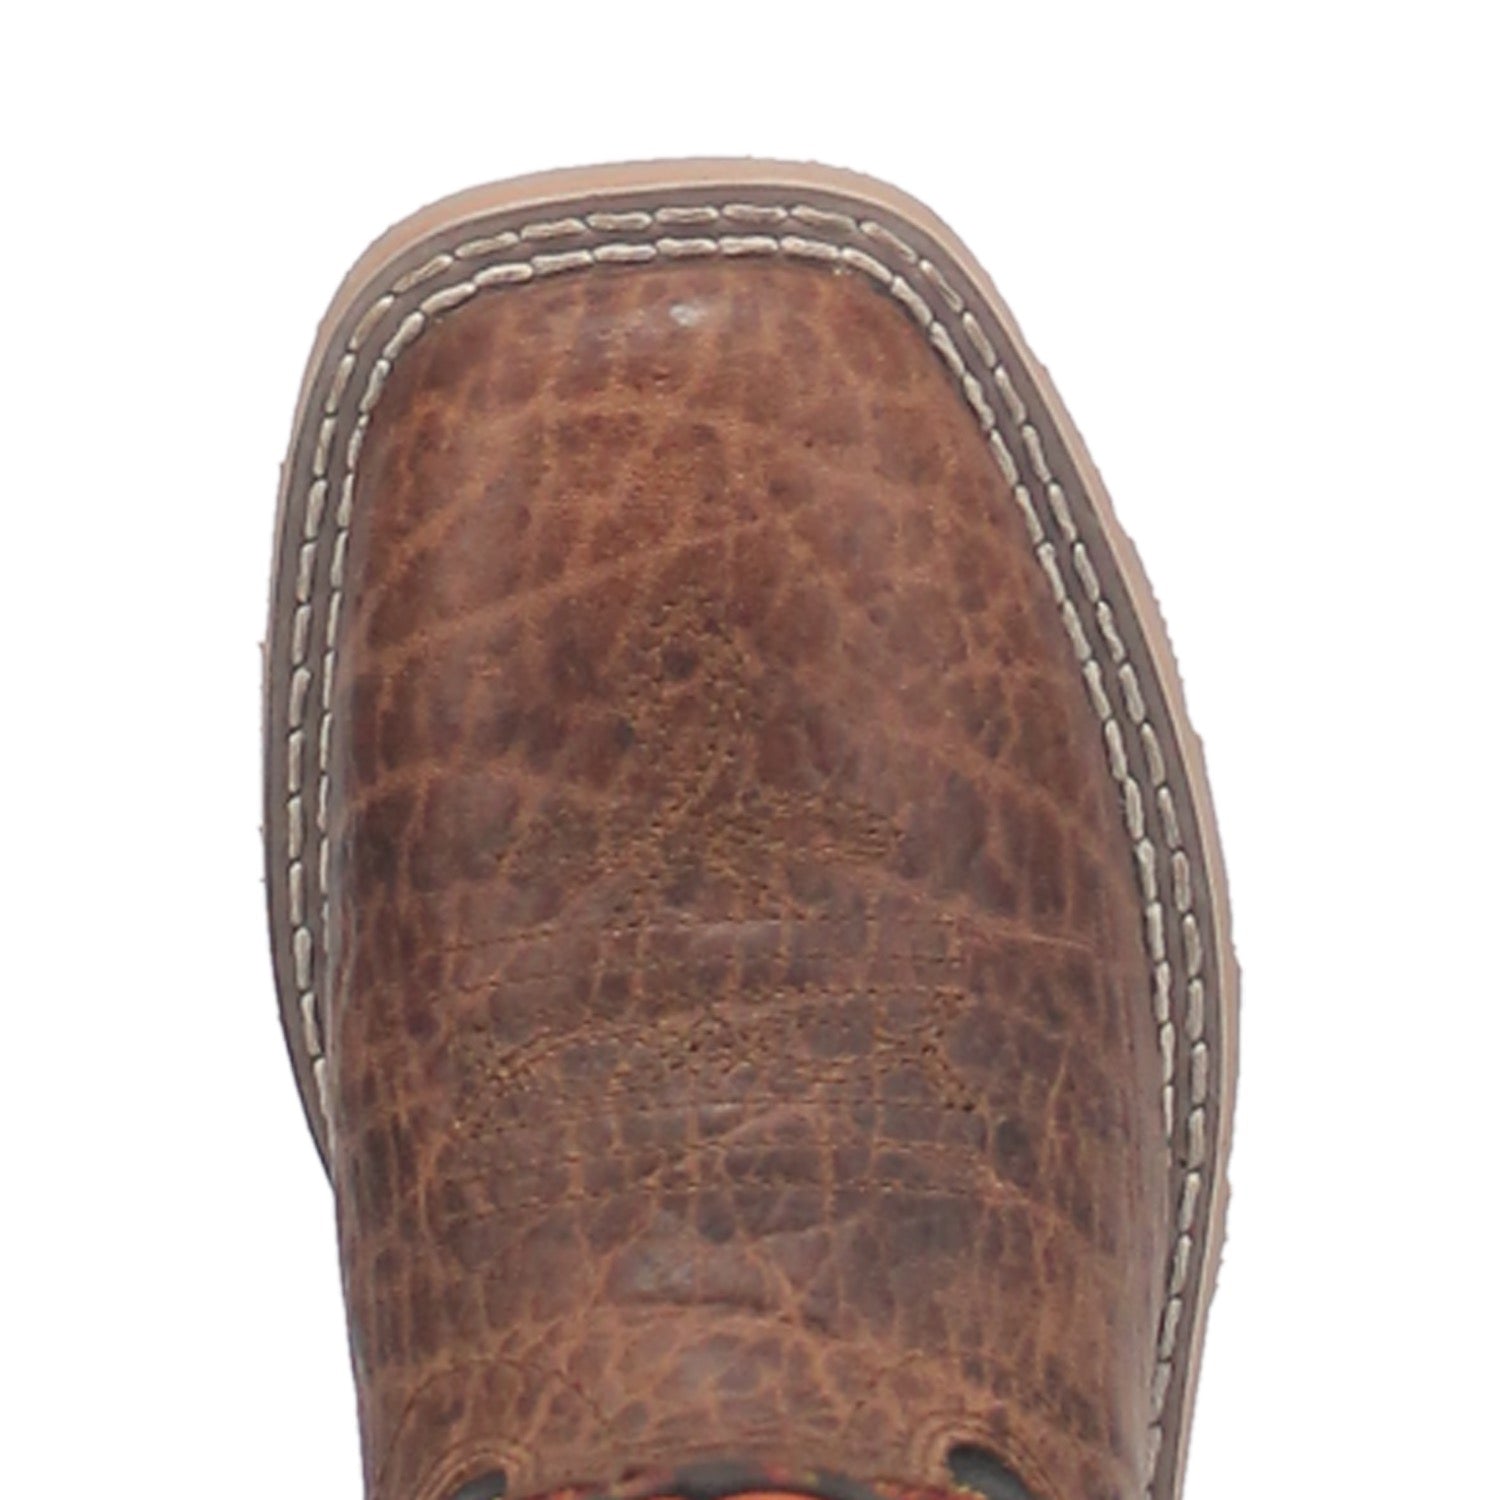 RYE LEATHER YOUTH BOOT Image